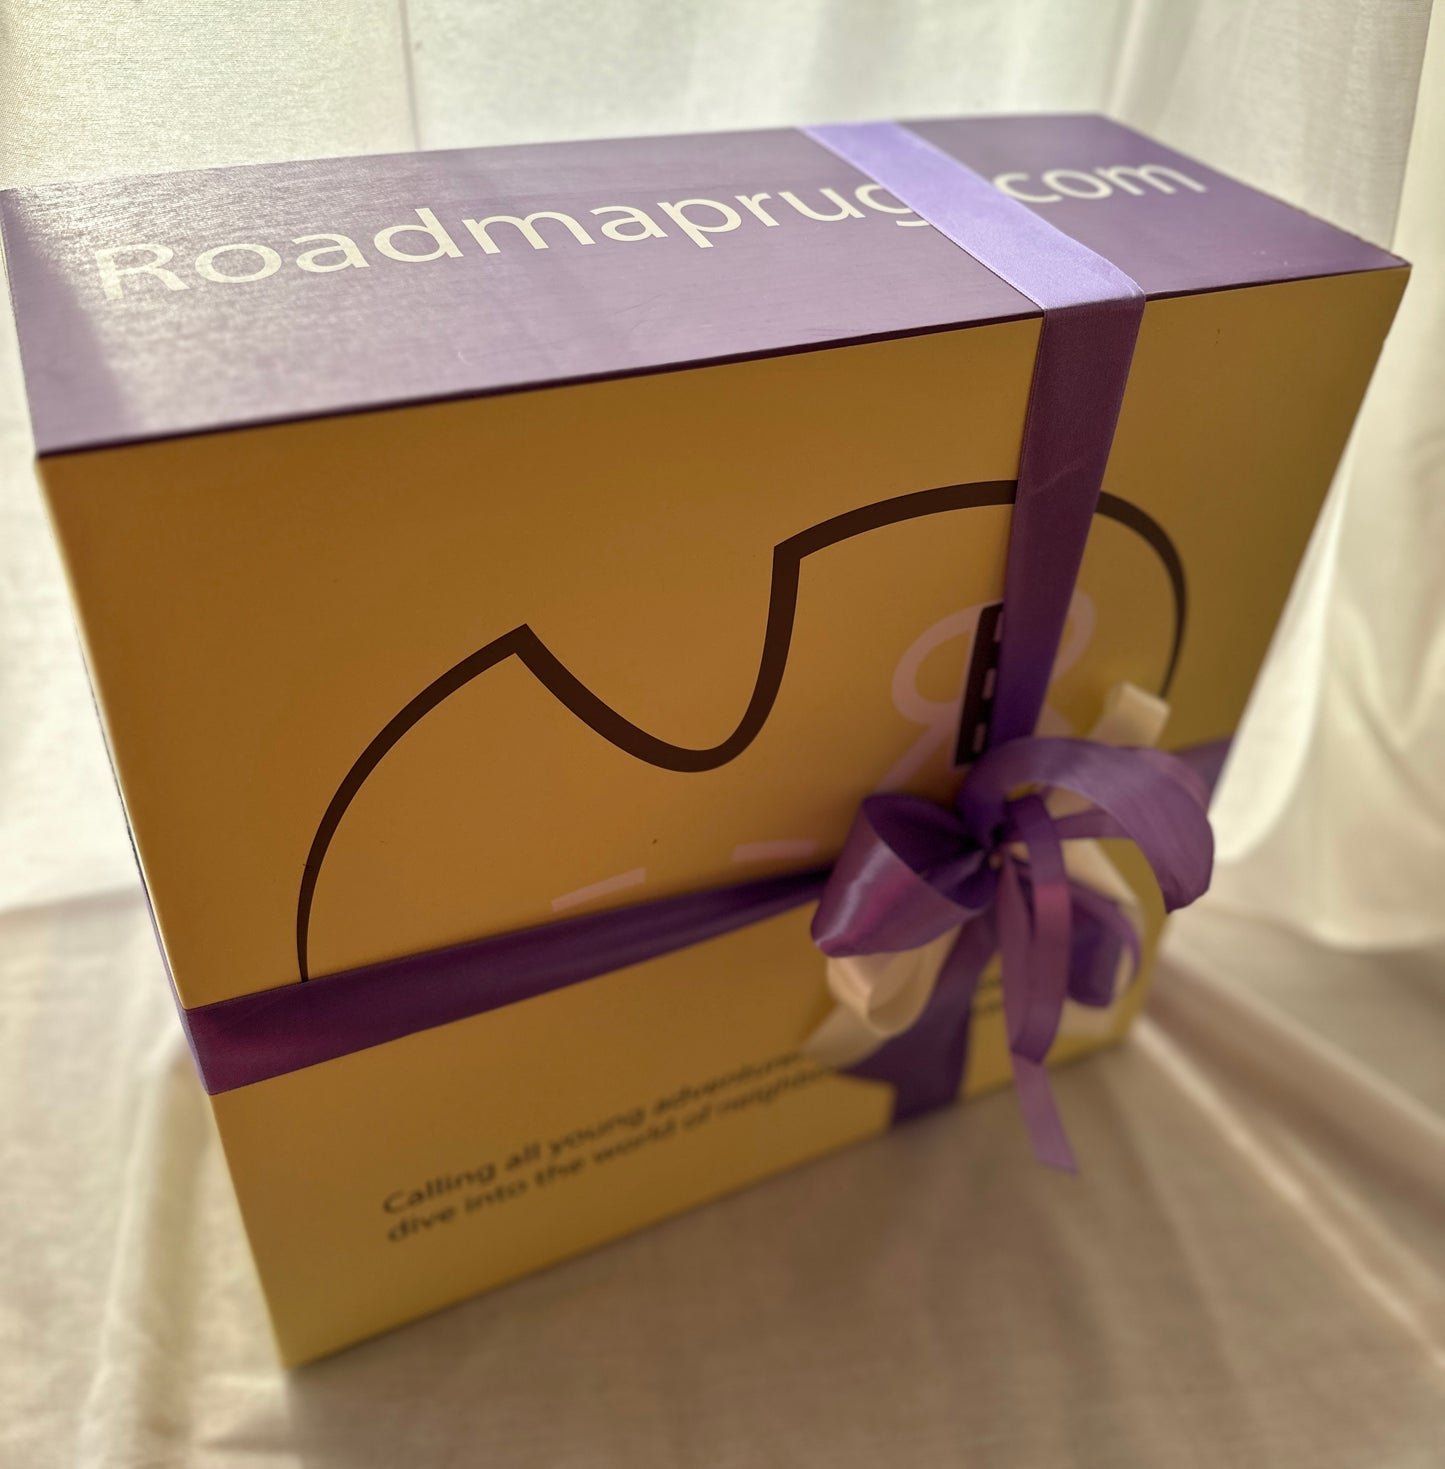 Road Map Rugs Gift Card!